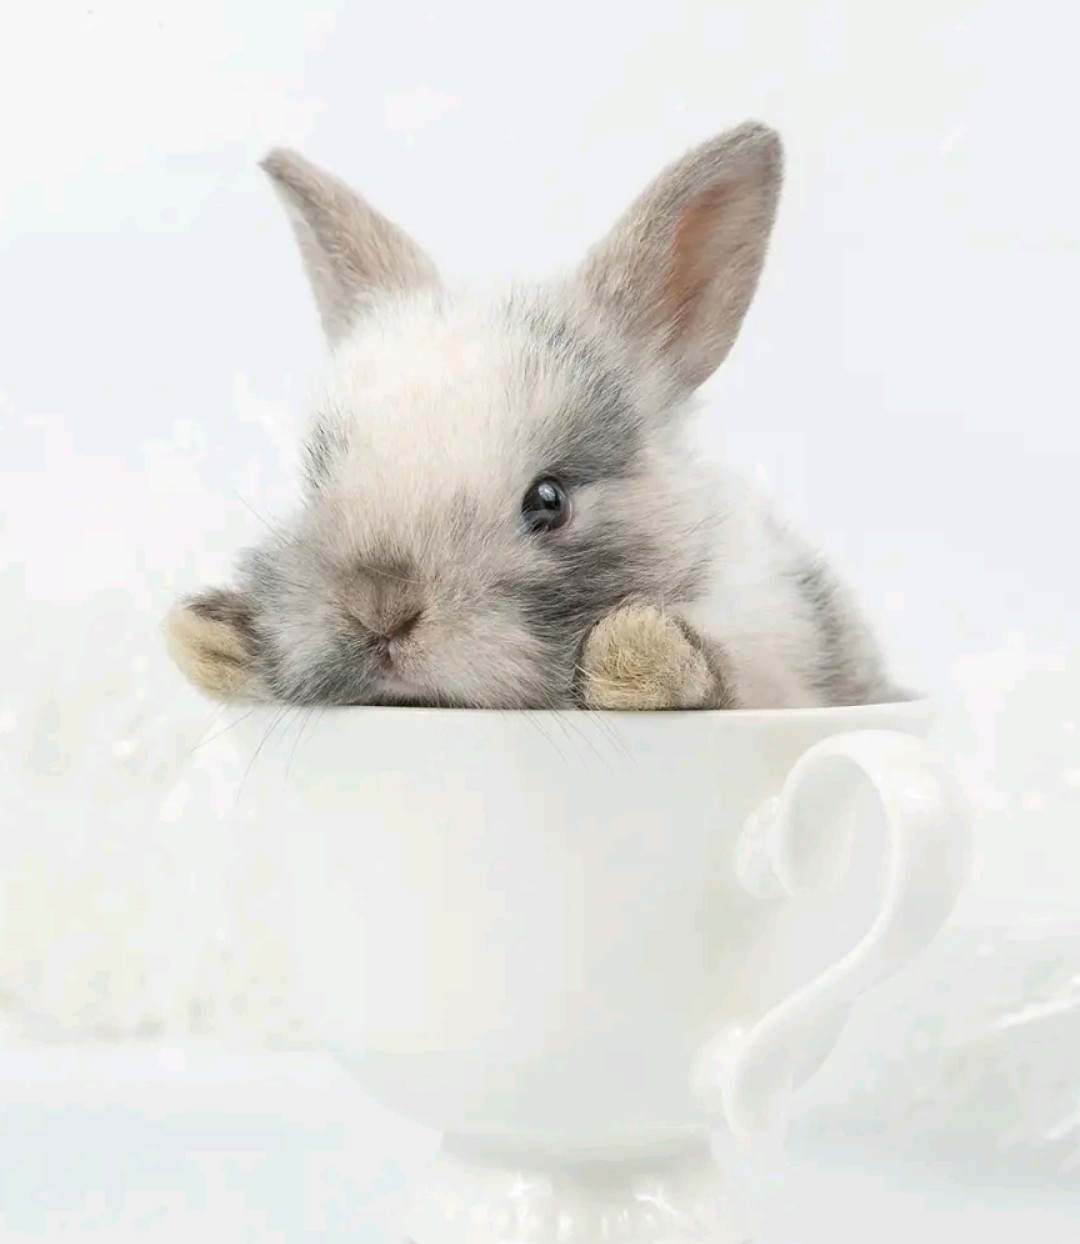 Baby bunny in the cup by Solgalovamaria on DeviantArt